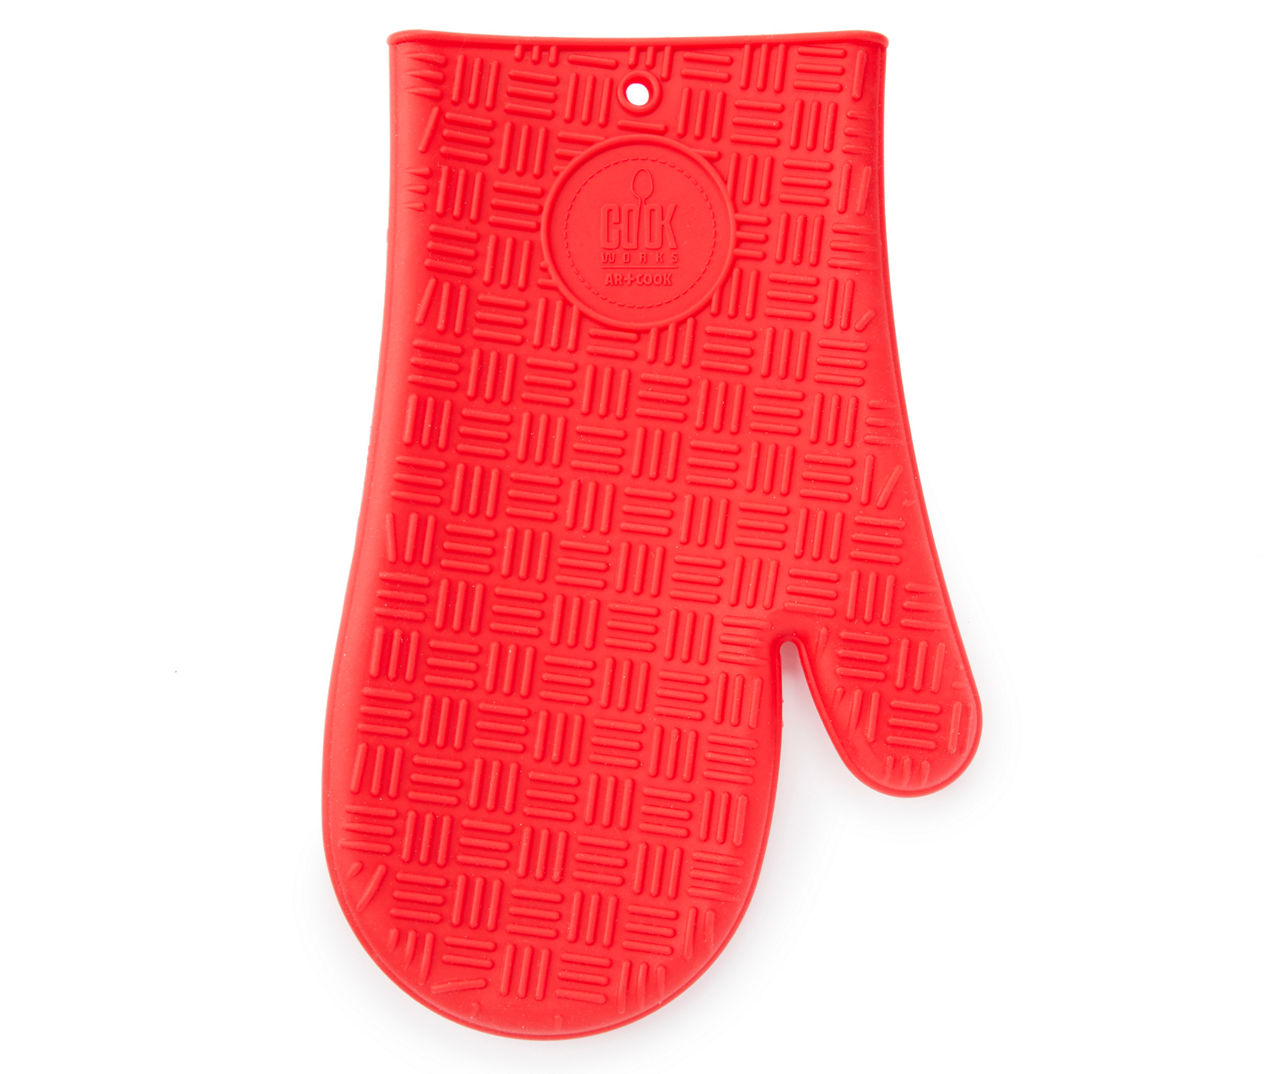 Cook Works - Red Silicone Pot Handle Sleeve